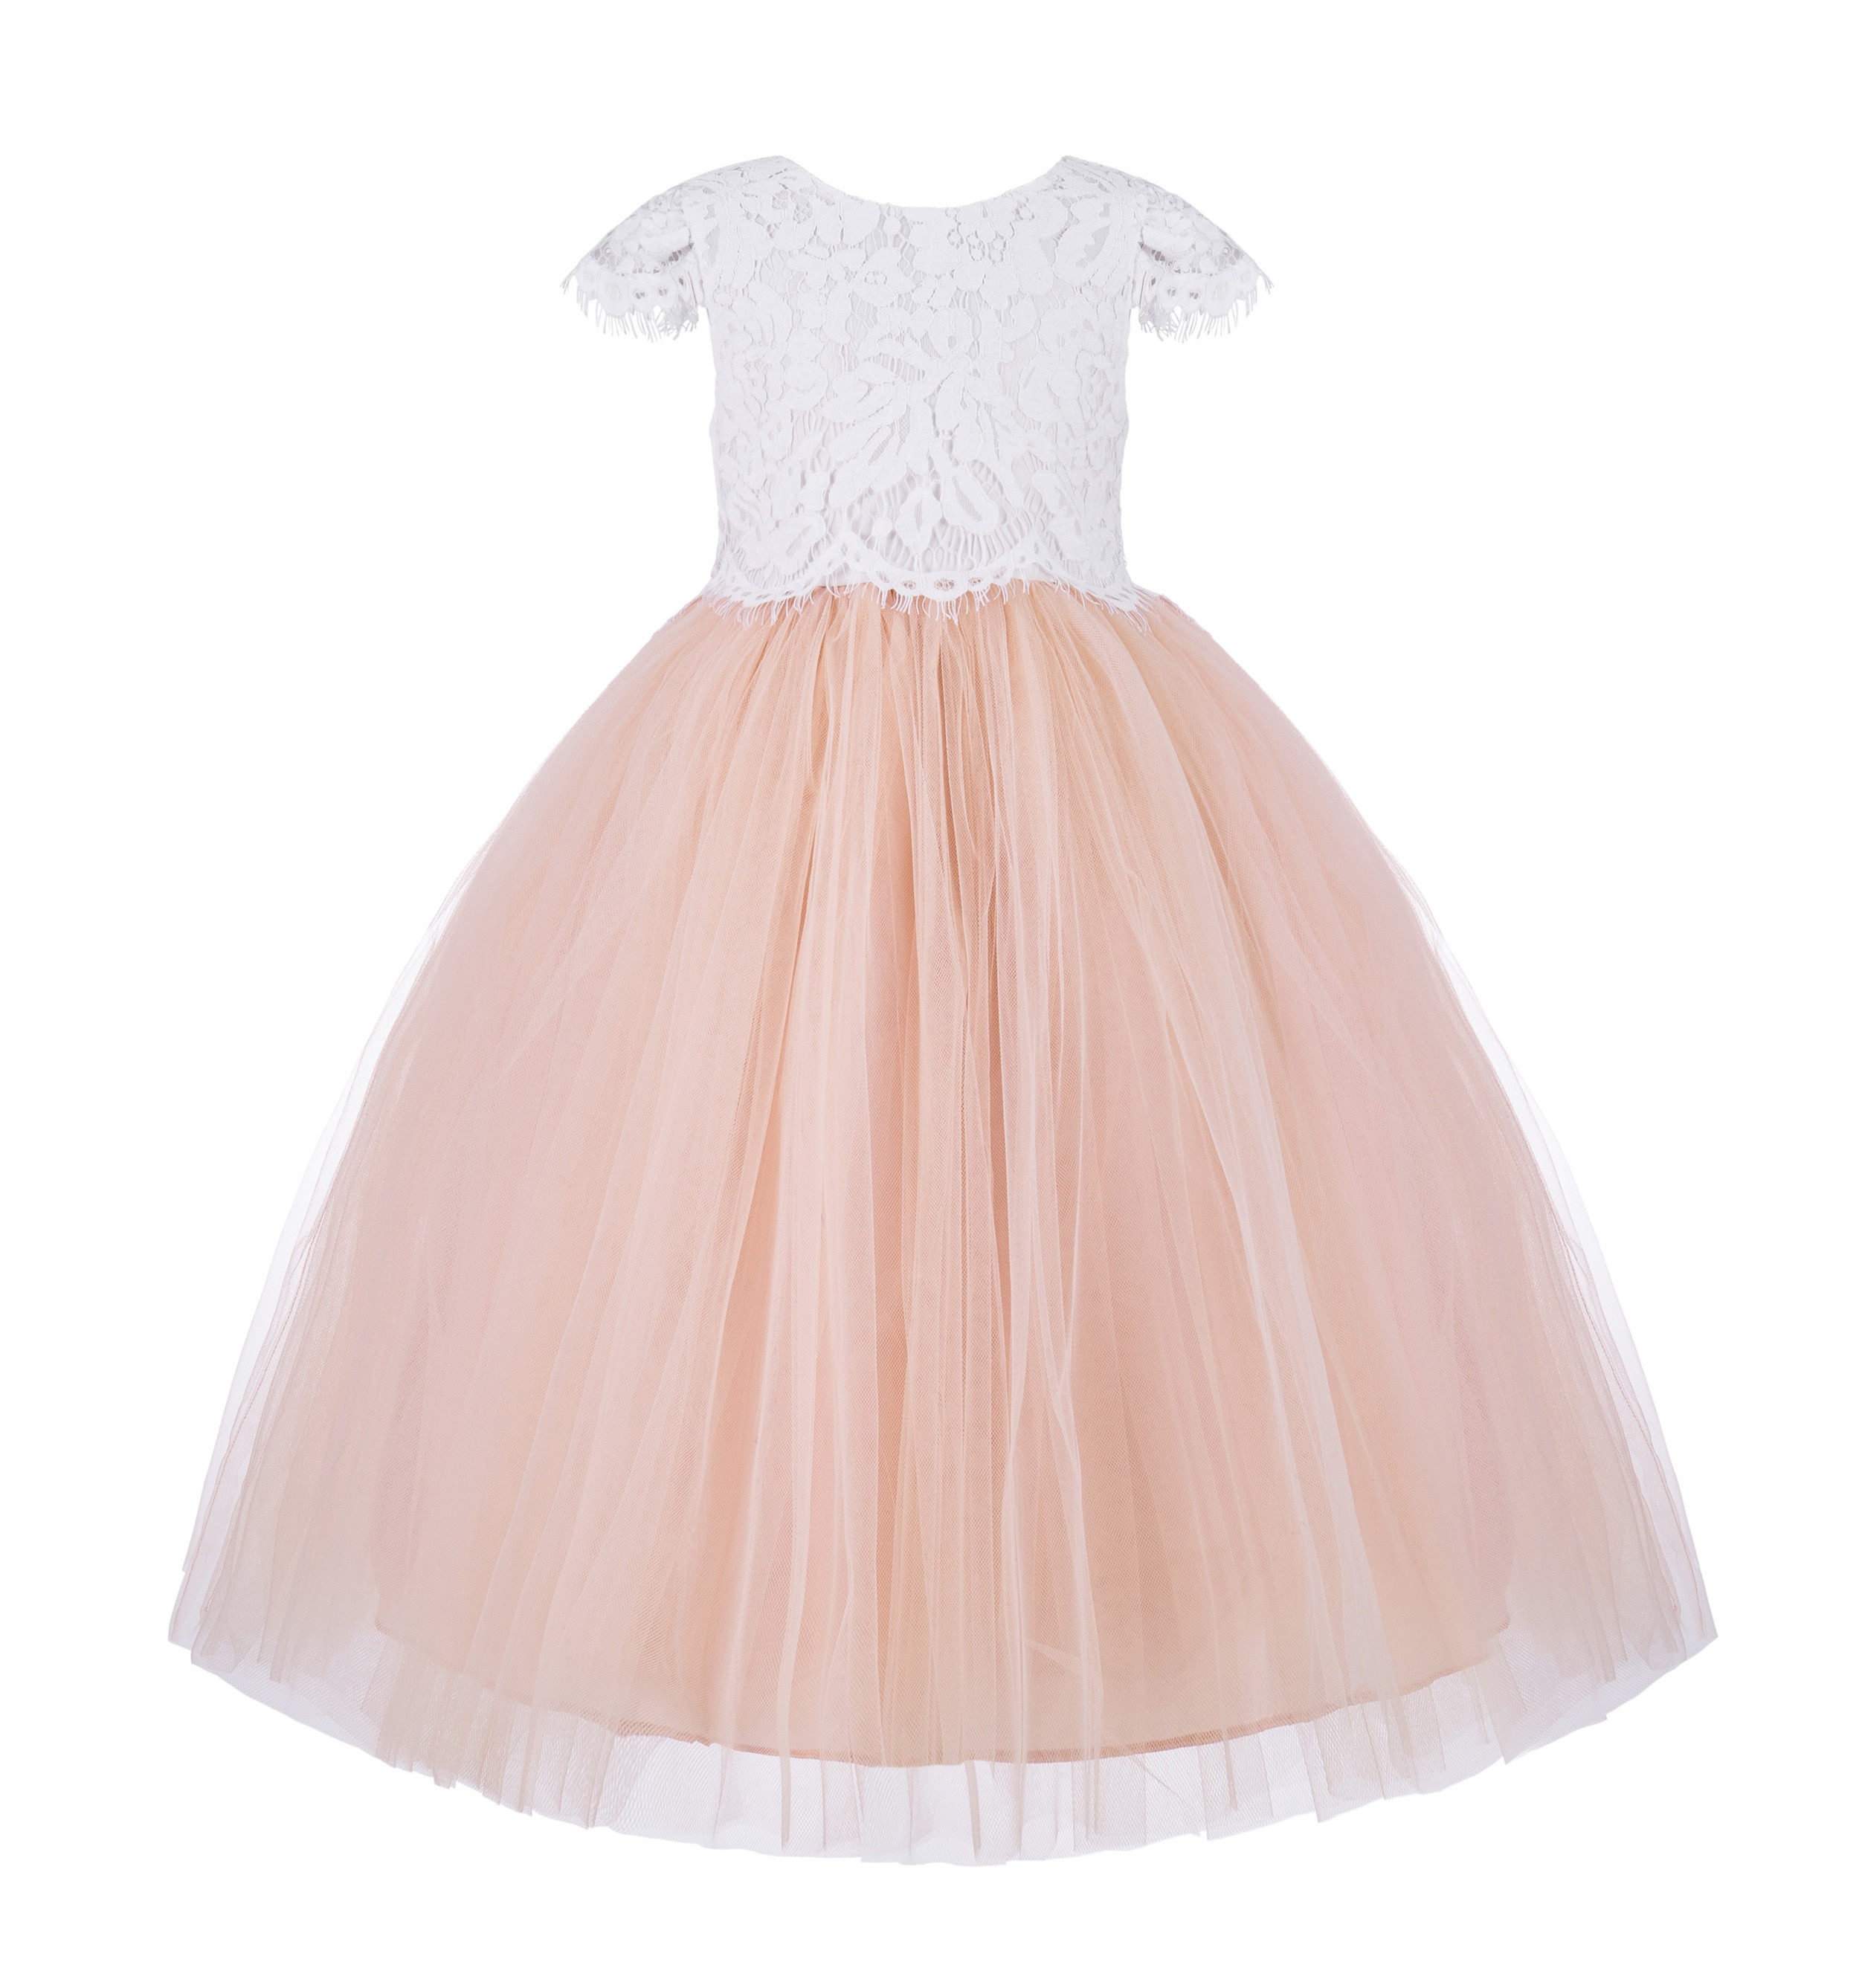 Blush Pink Floral Lace Flower Girl Dress Cap Sleeves 214